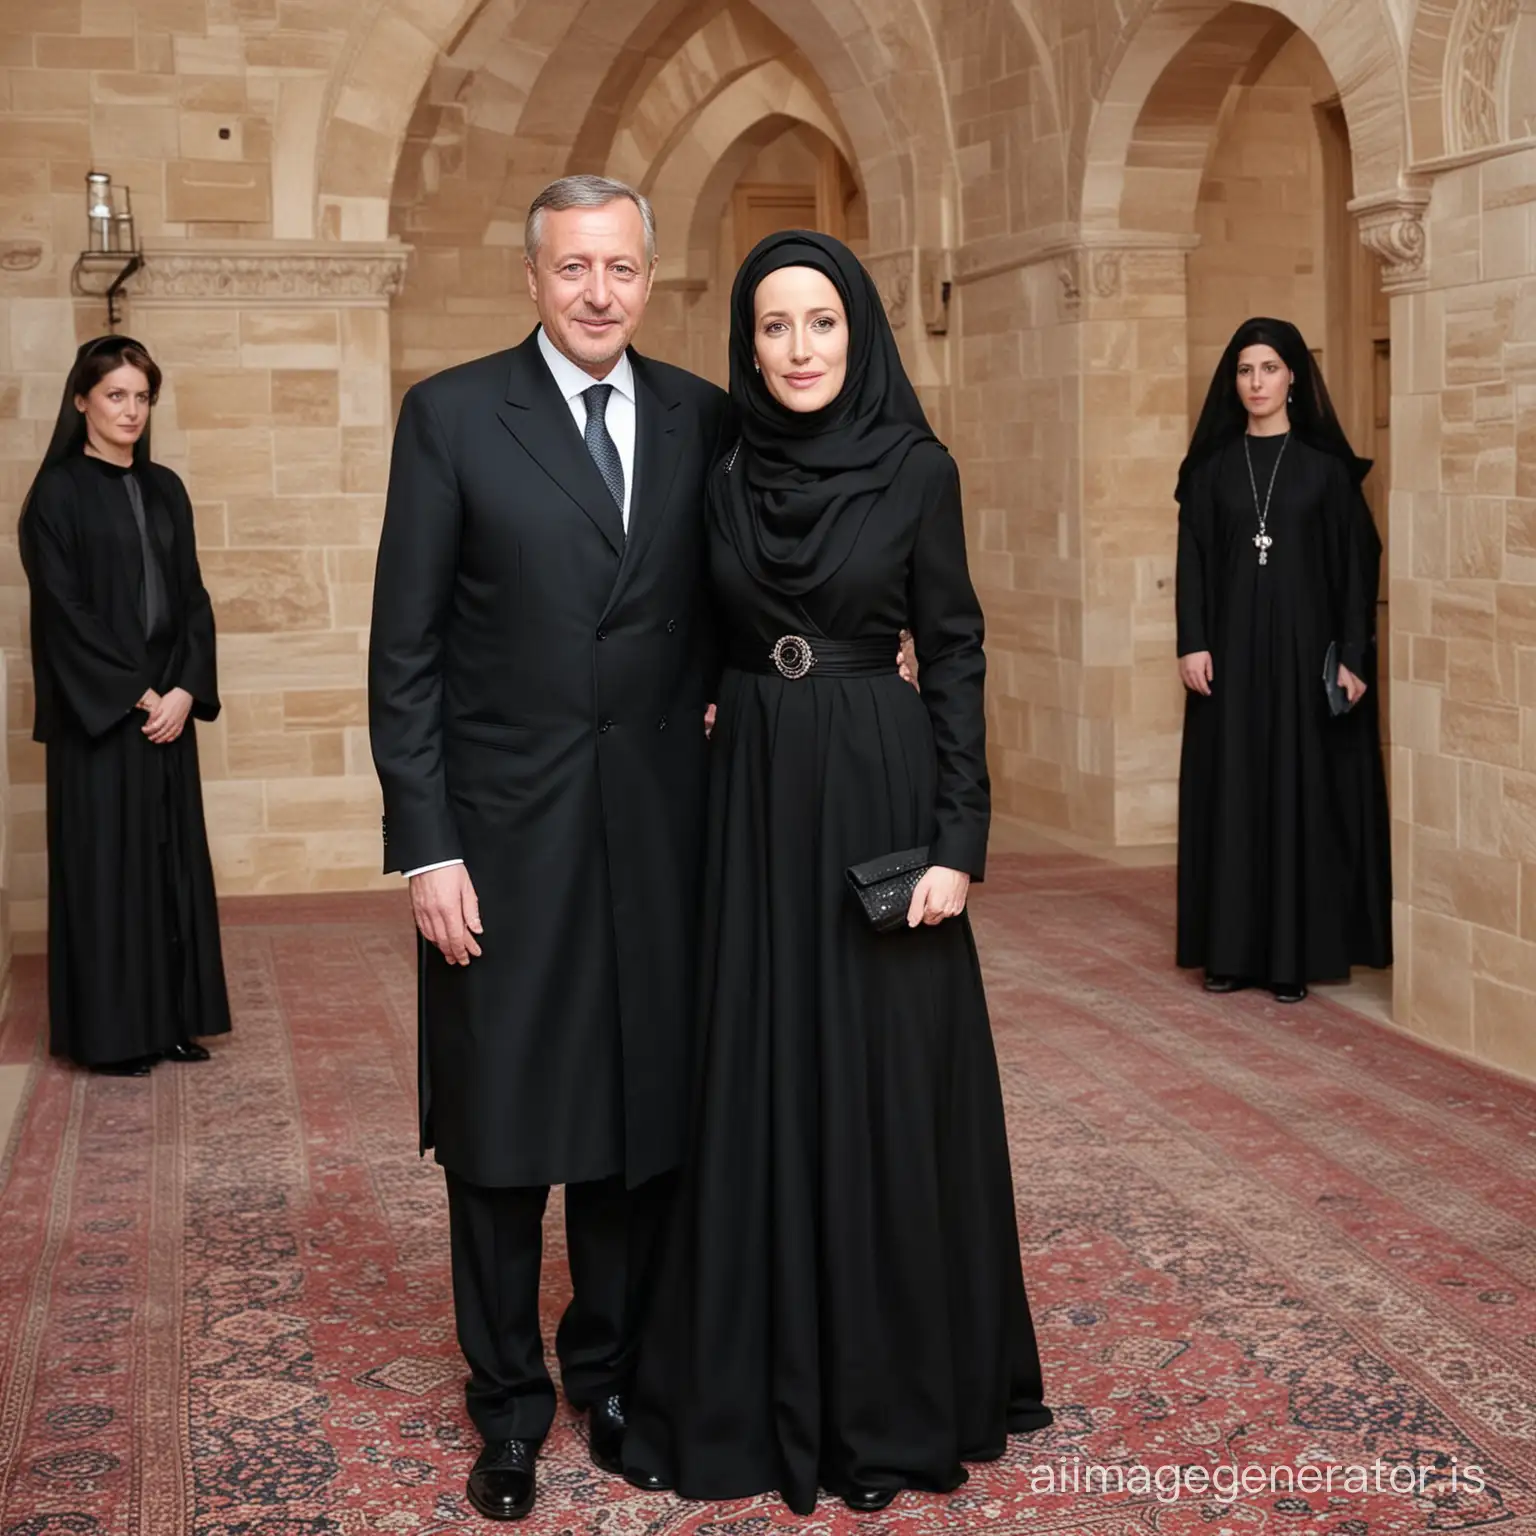 Gillian Anderson marrying President Erdogan, he asked Gillian to dress accordingly to his muslim faith and wear a floor-length black abaya with long black hijab and stand demurely beside him as Emine Erdogan , his newlywed devoted wife